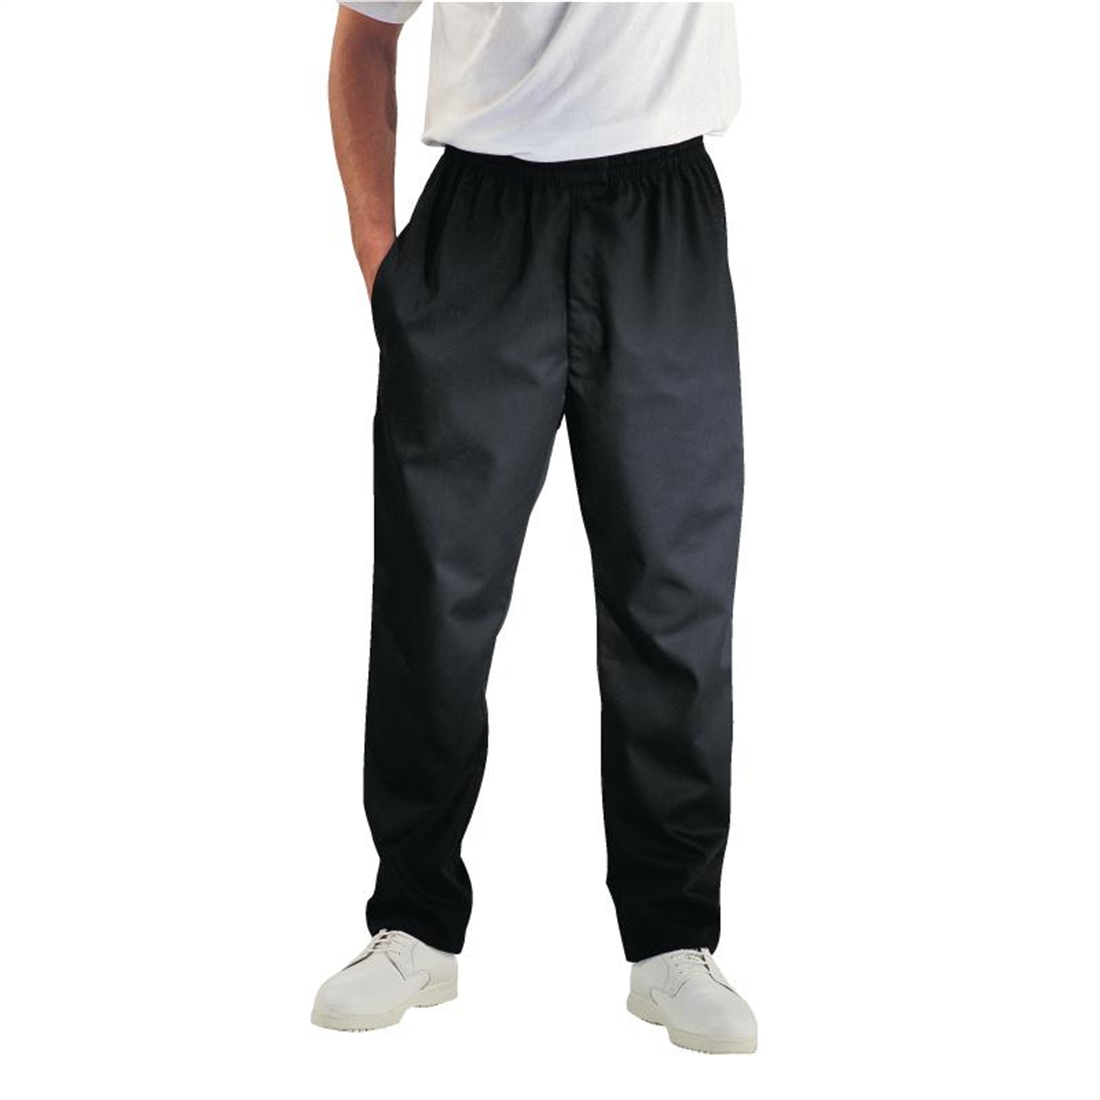 Chef Works Unisex Easyfit Chefs Trousers Black M